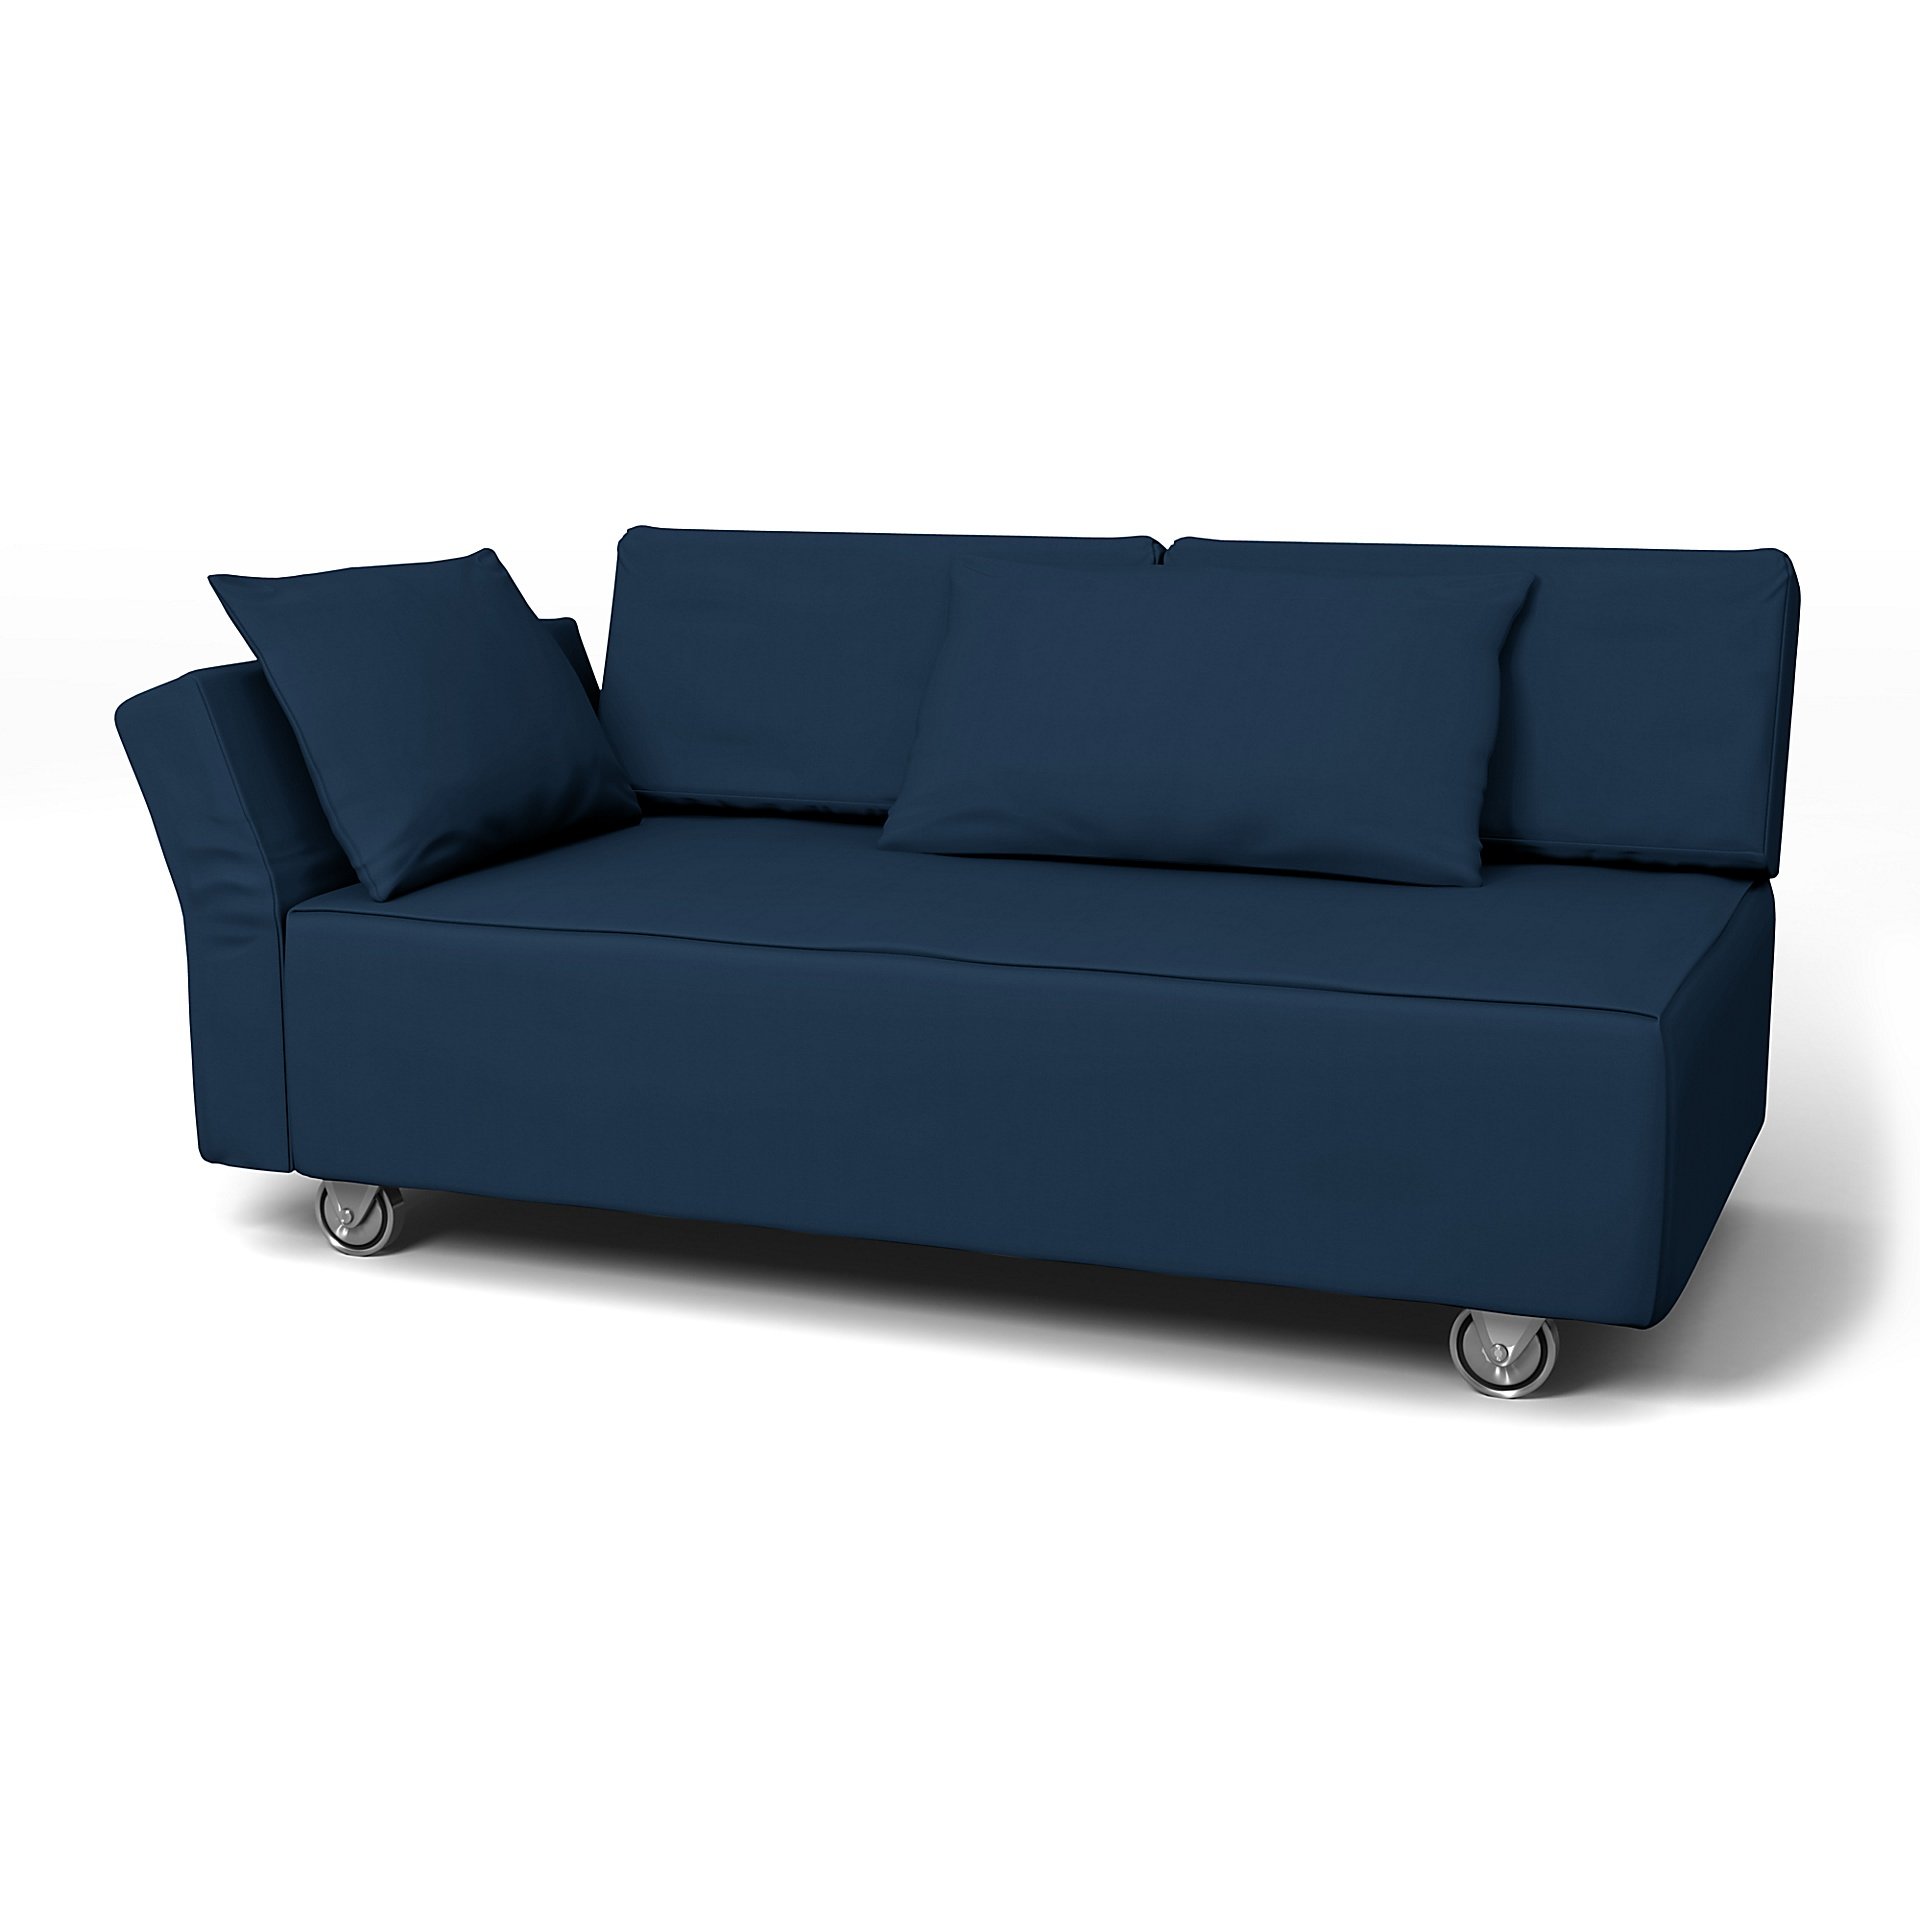 IKEA - Falsterbo 2 Seat Sofa with Left Arm Cover, Deep Navy Blue, Cotton - Bemz